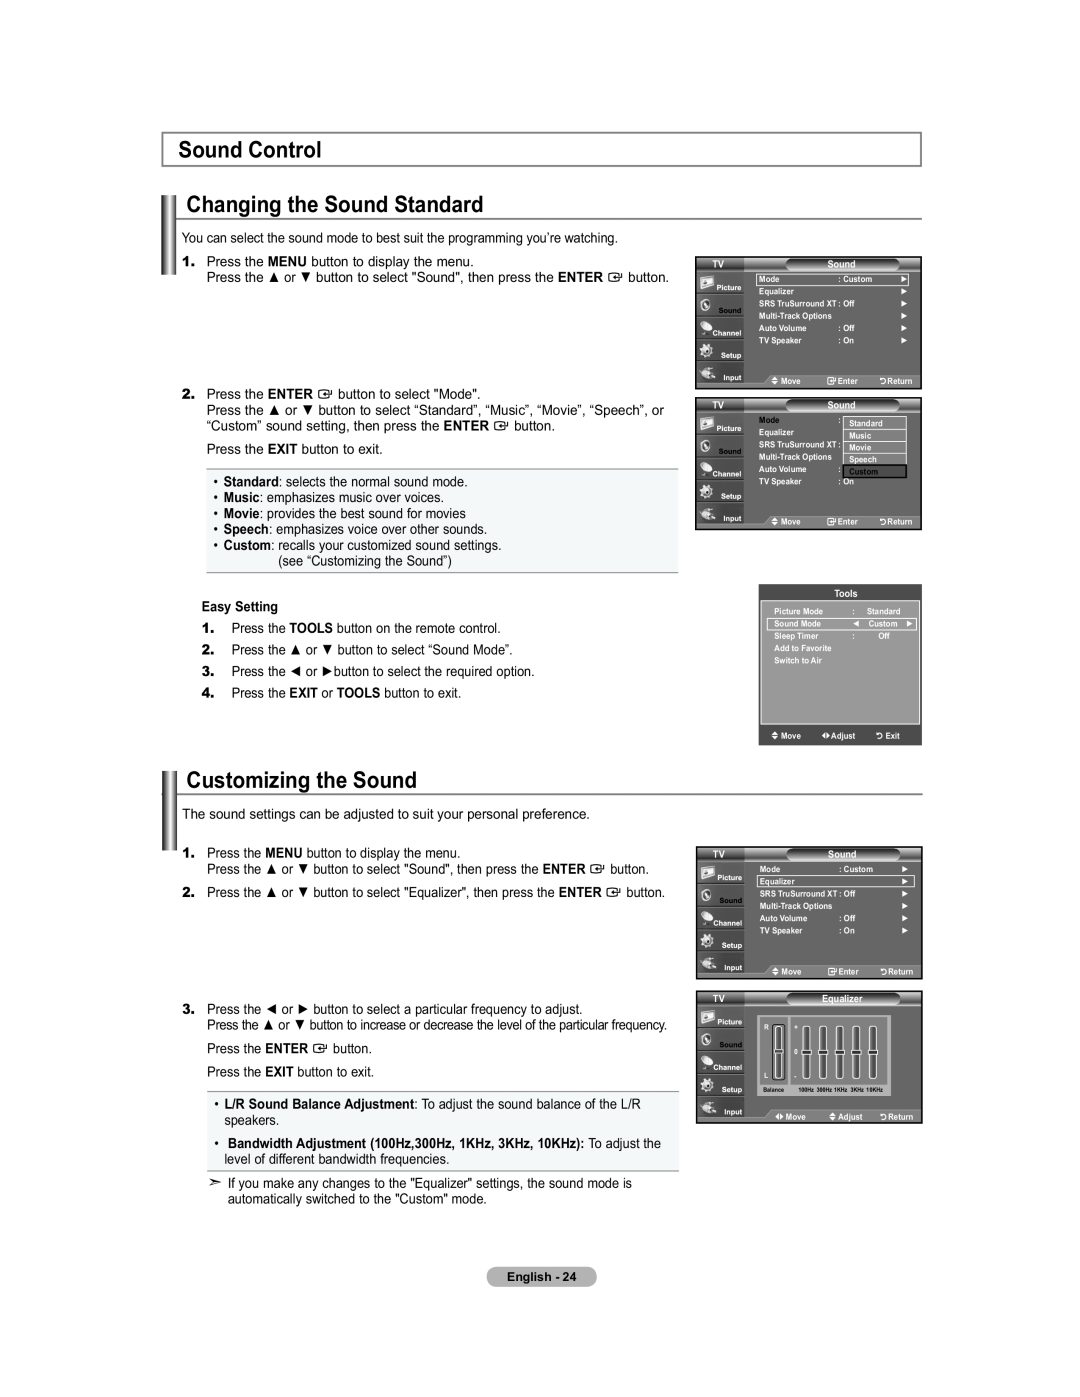 Samsung 451 user manual Sound Control Changing the Sound Standard, Customizing the Sound, Press the, Easy Setting, Enter 